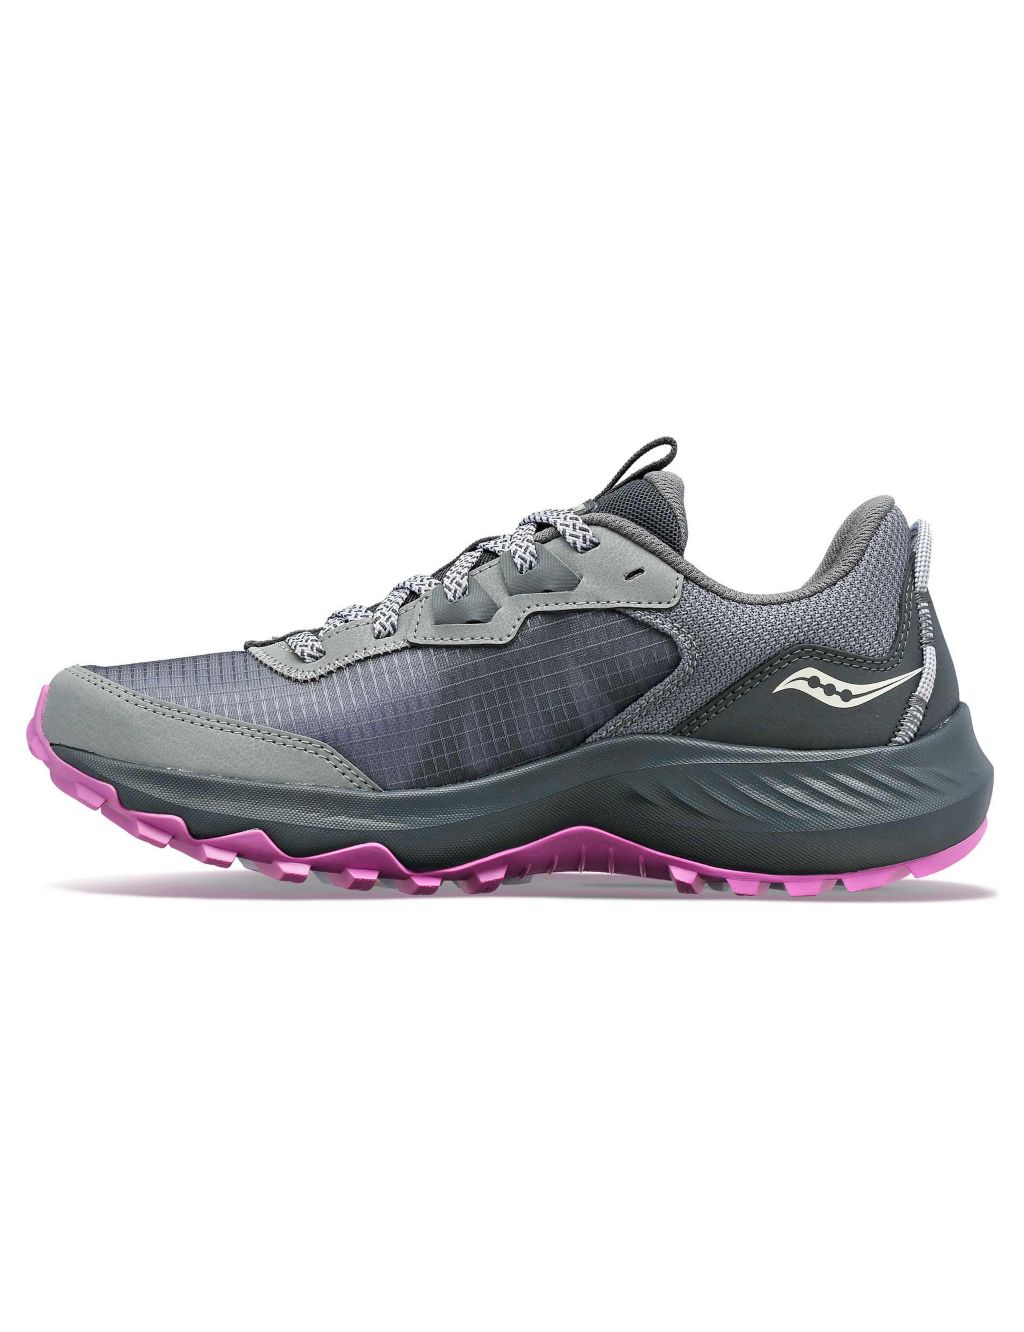 Aura TR Trainers image 3